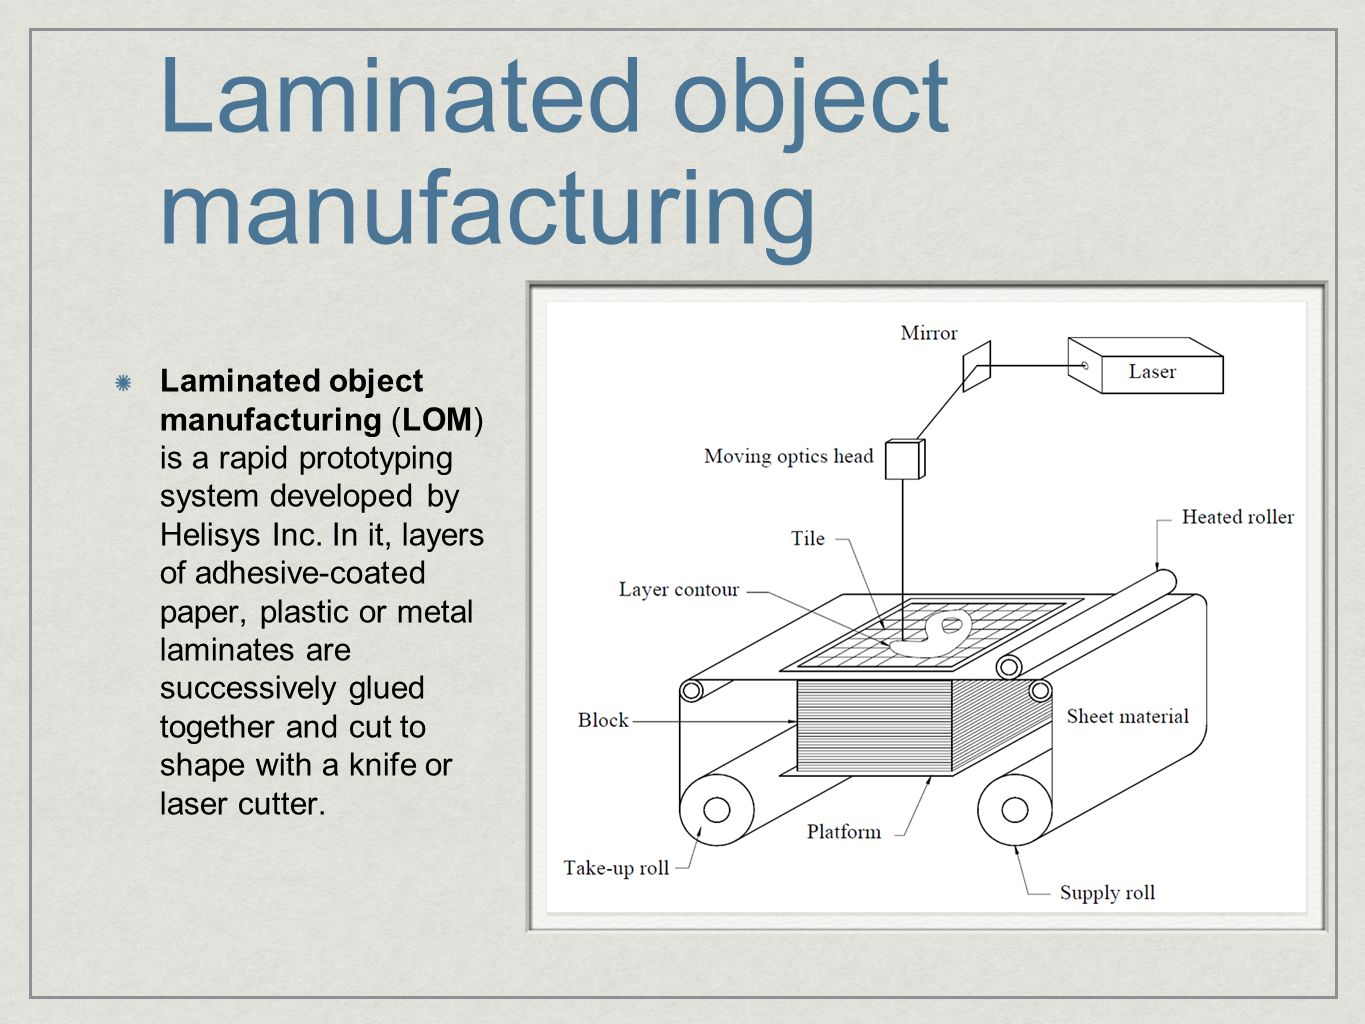 Laminated object manufacturing Laminated object manufacturing (LOM) is a rapid prototyping system developed by Helisys Inc.